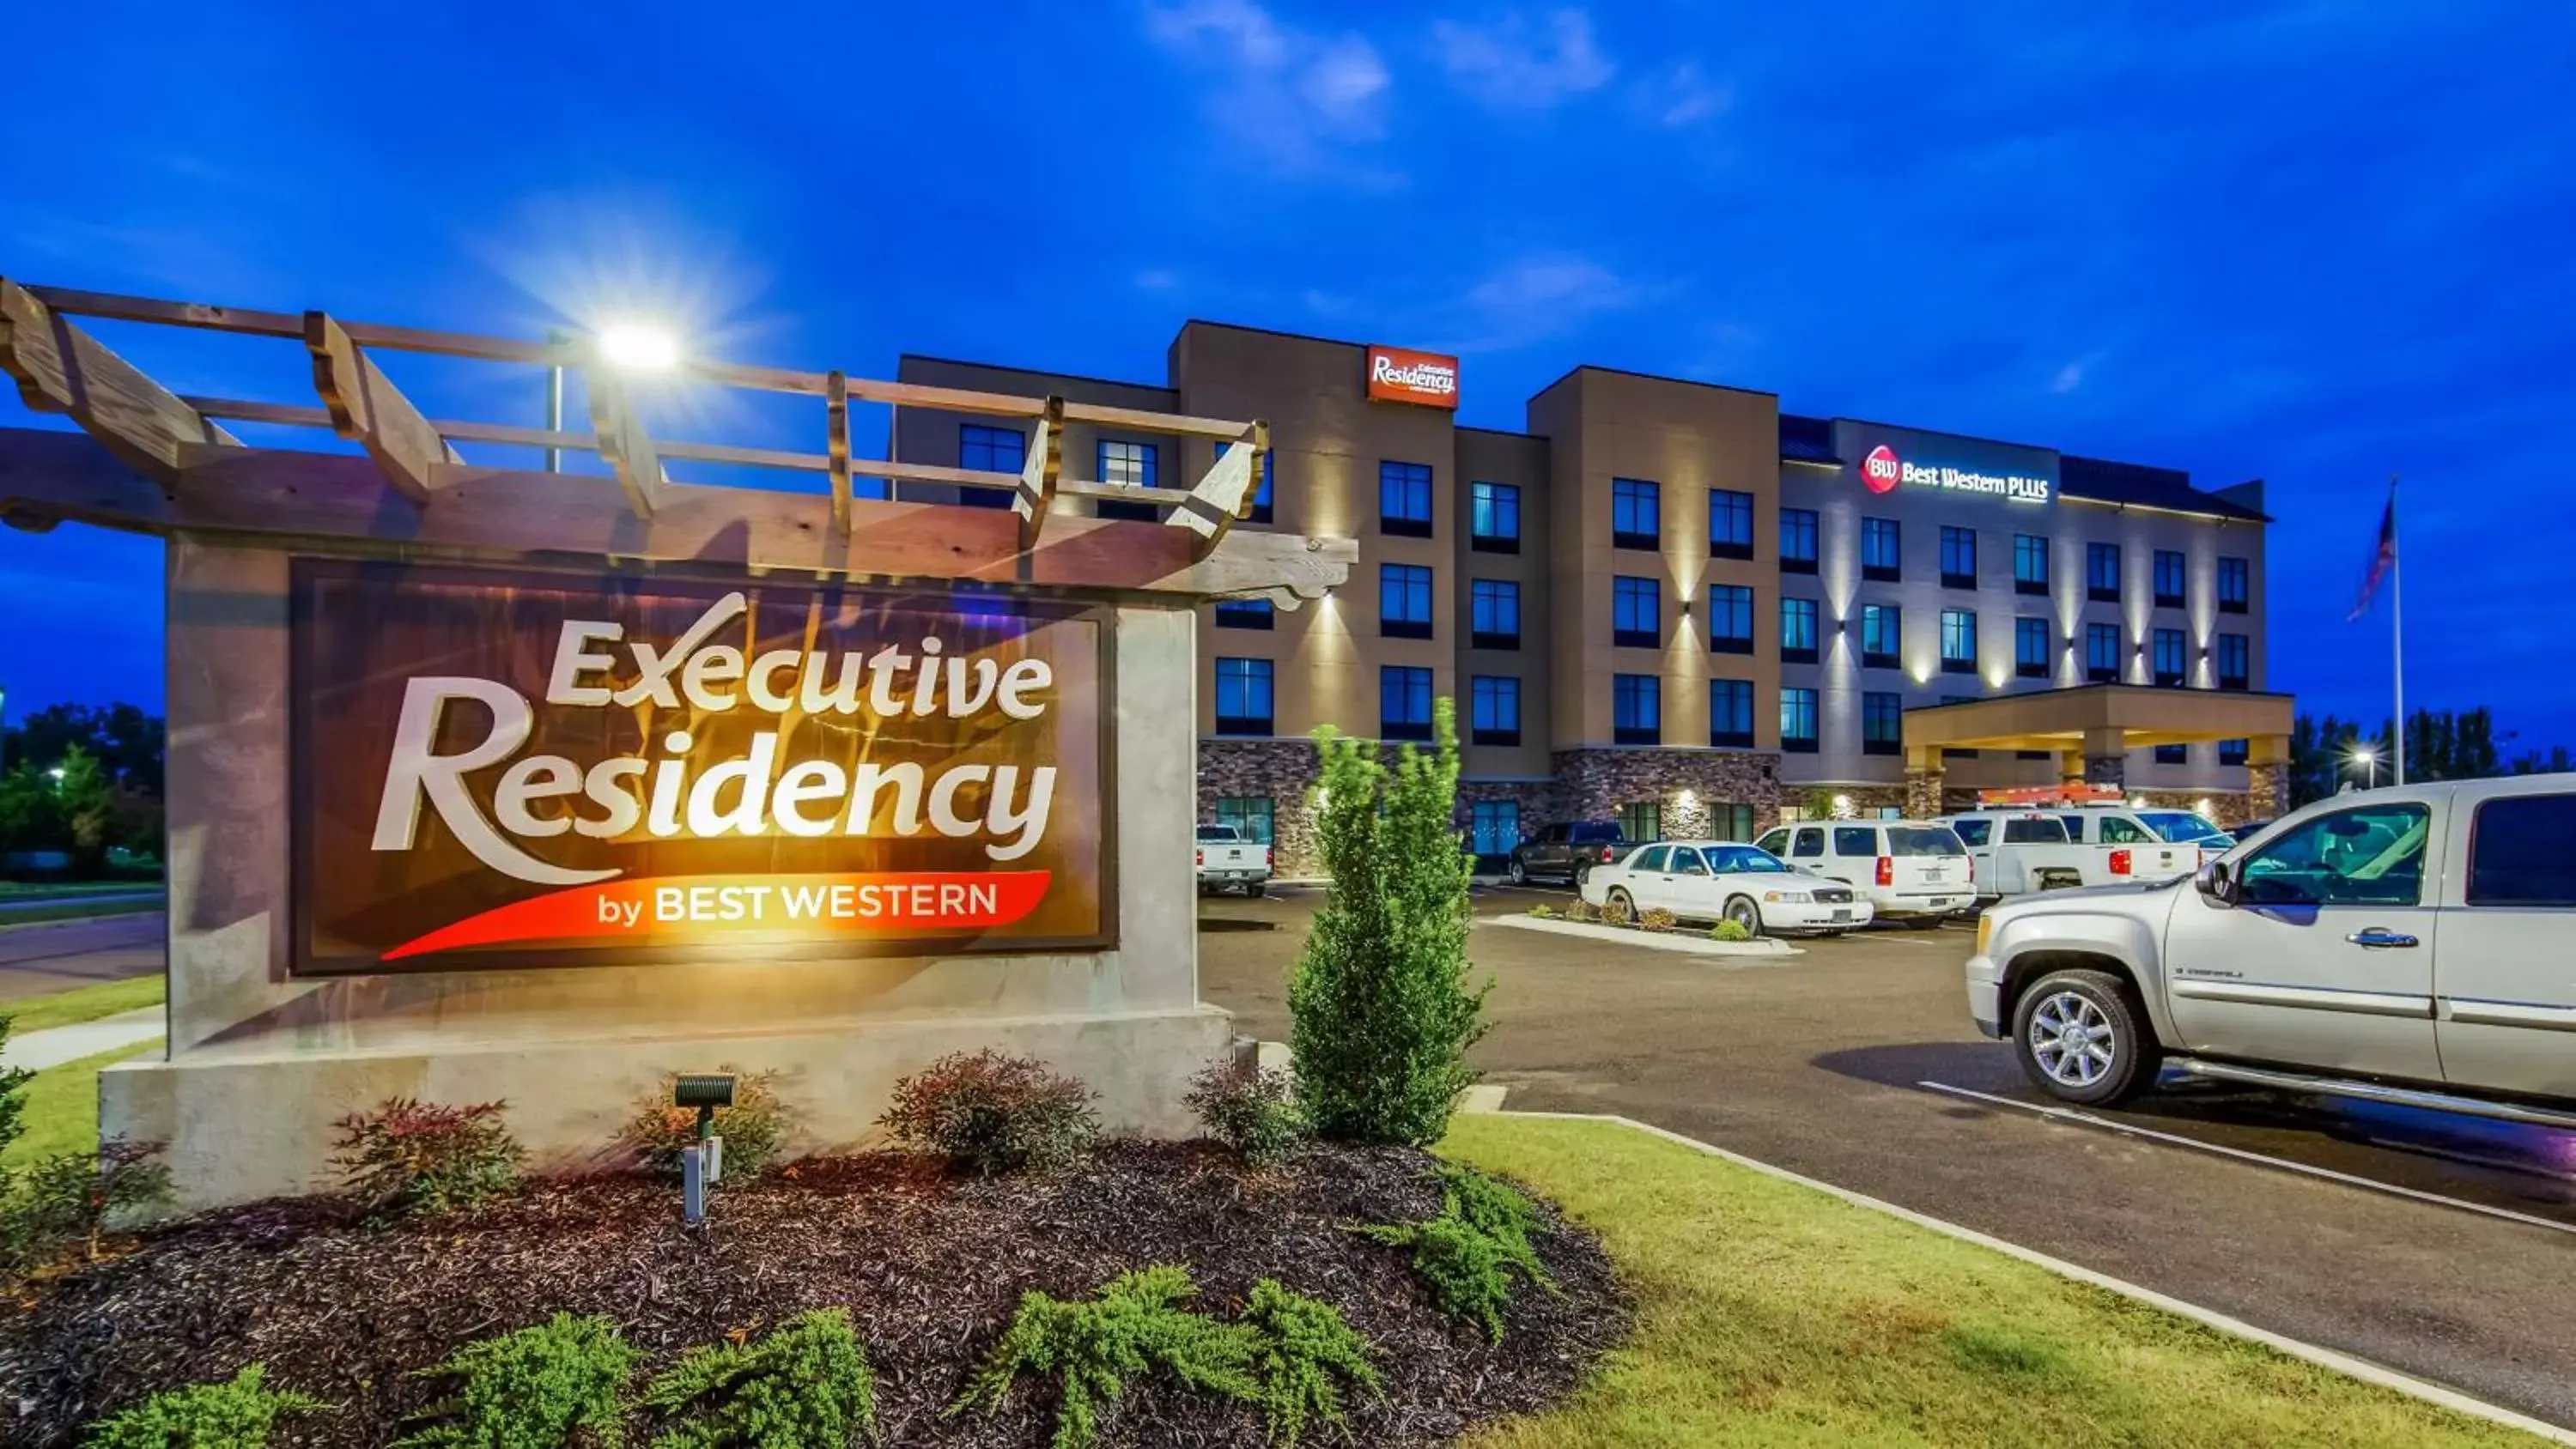 Property Building in Best Western Plus Executive Residency Marion